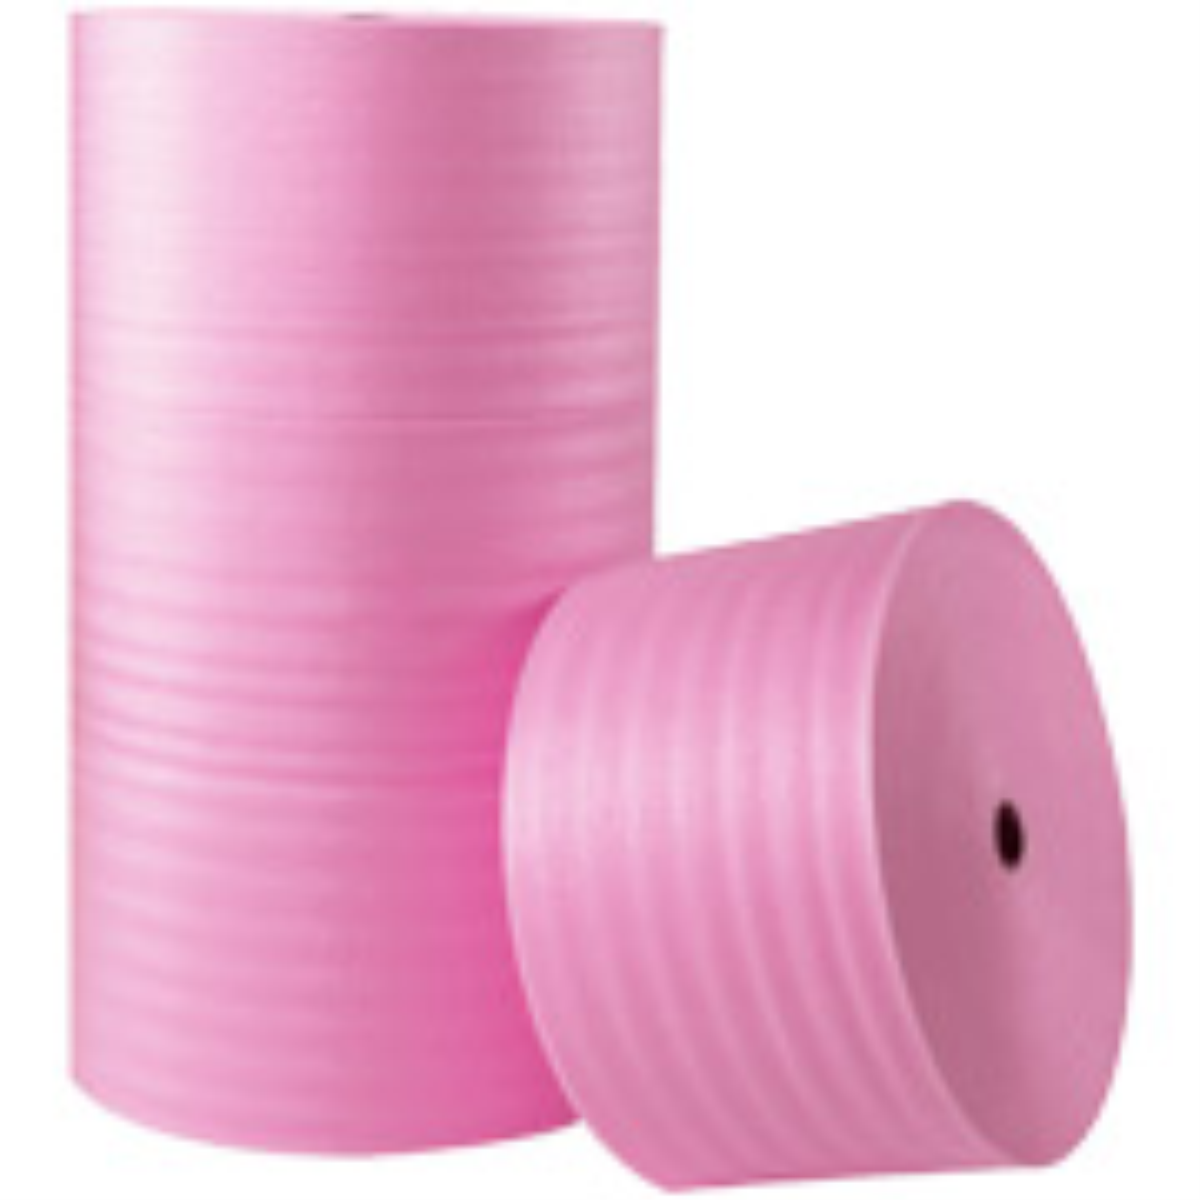 1/8″ x 6″ x 550′ NON Perforated Anti-Static Air Foam Rolls Packed 12 per Bundle